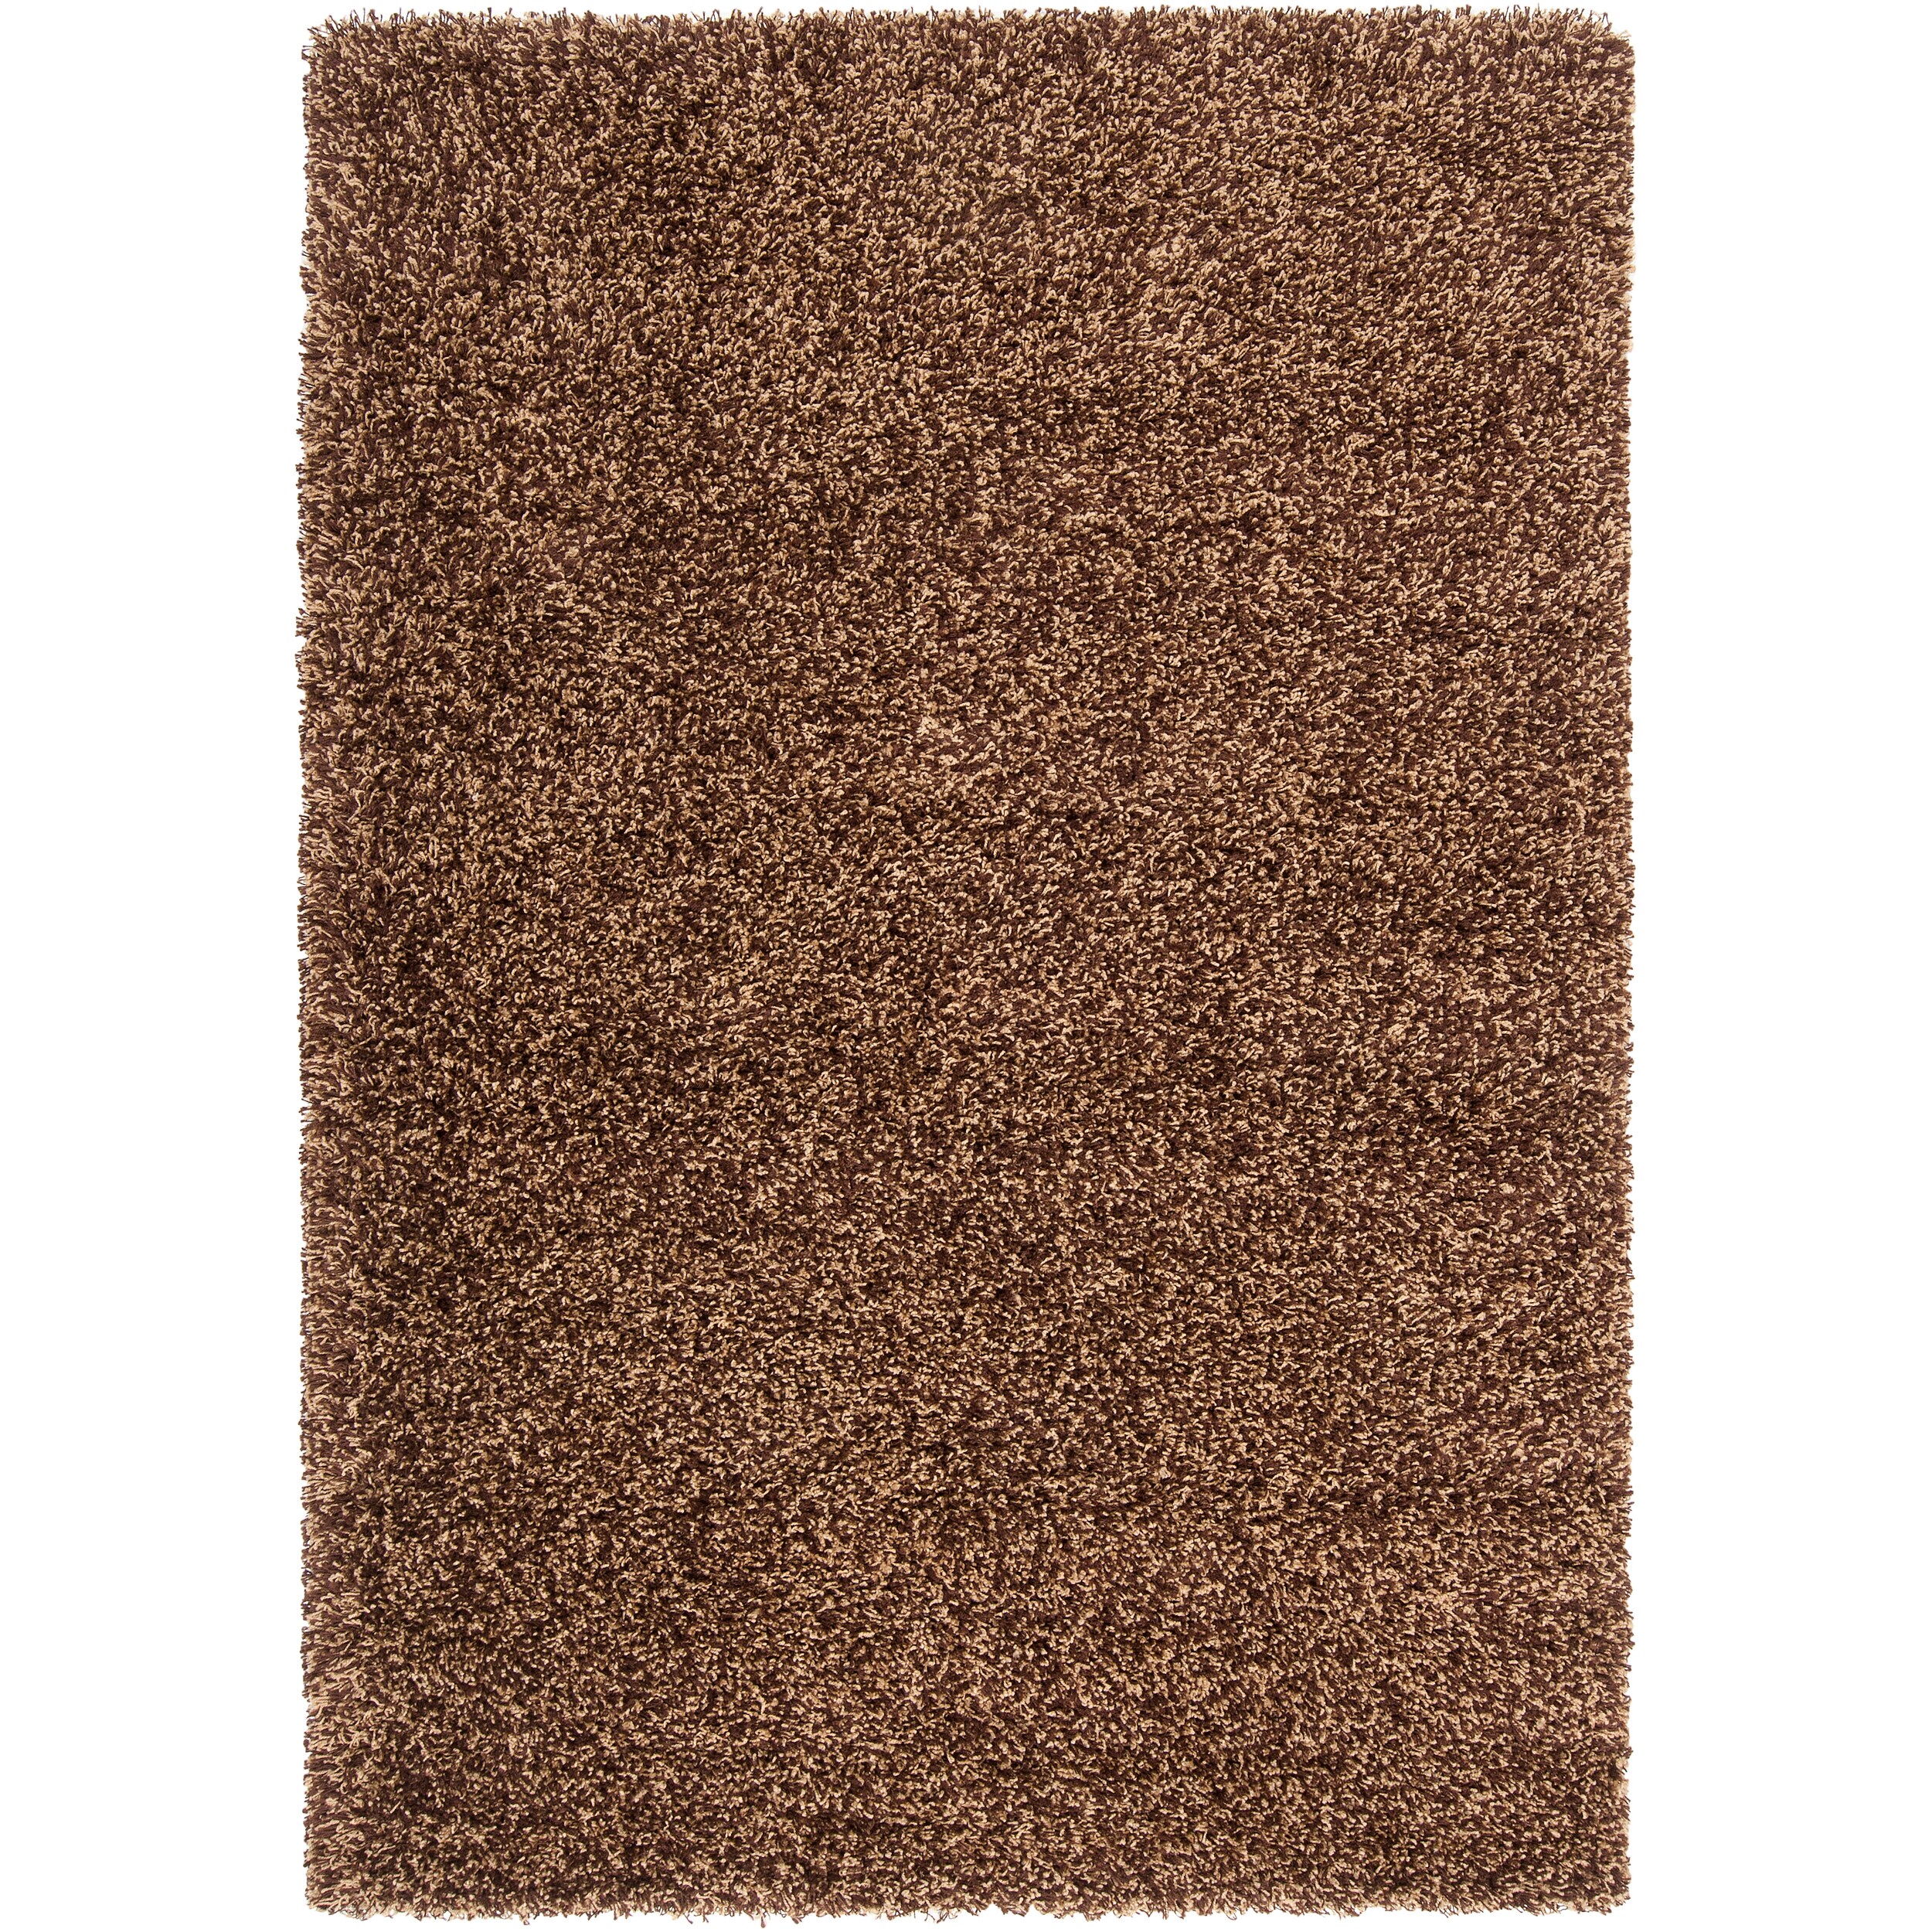 Transitional Woven Brown Luxurious Soft Shag Rug (67 X 96)